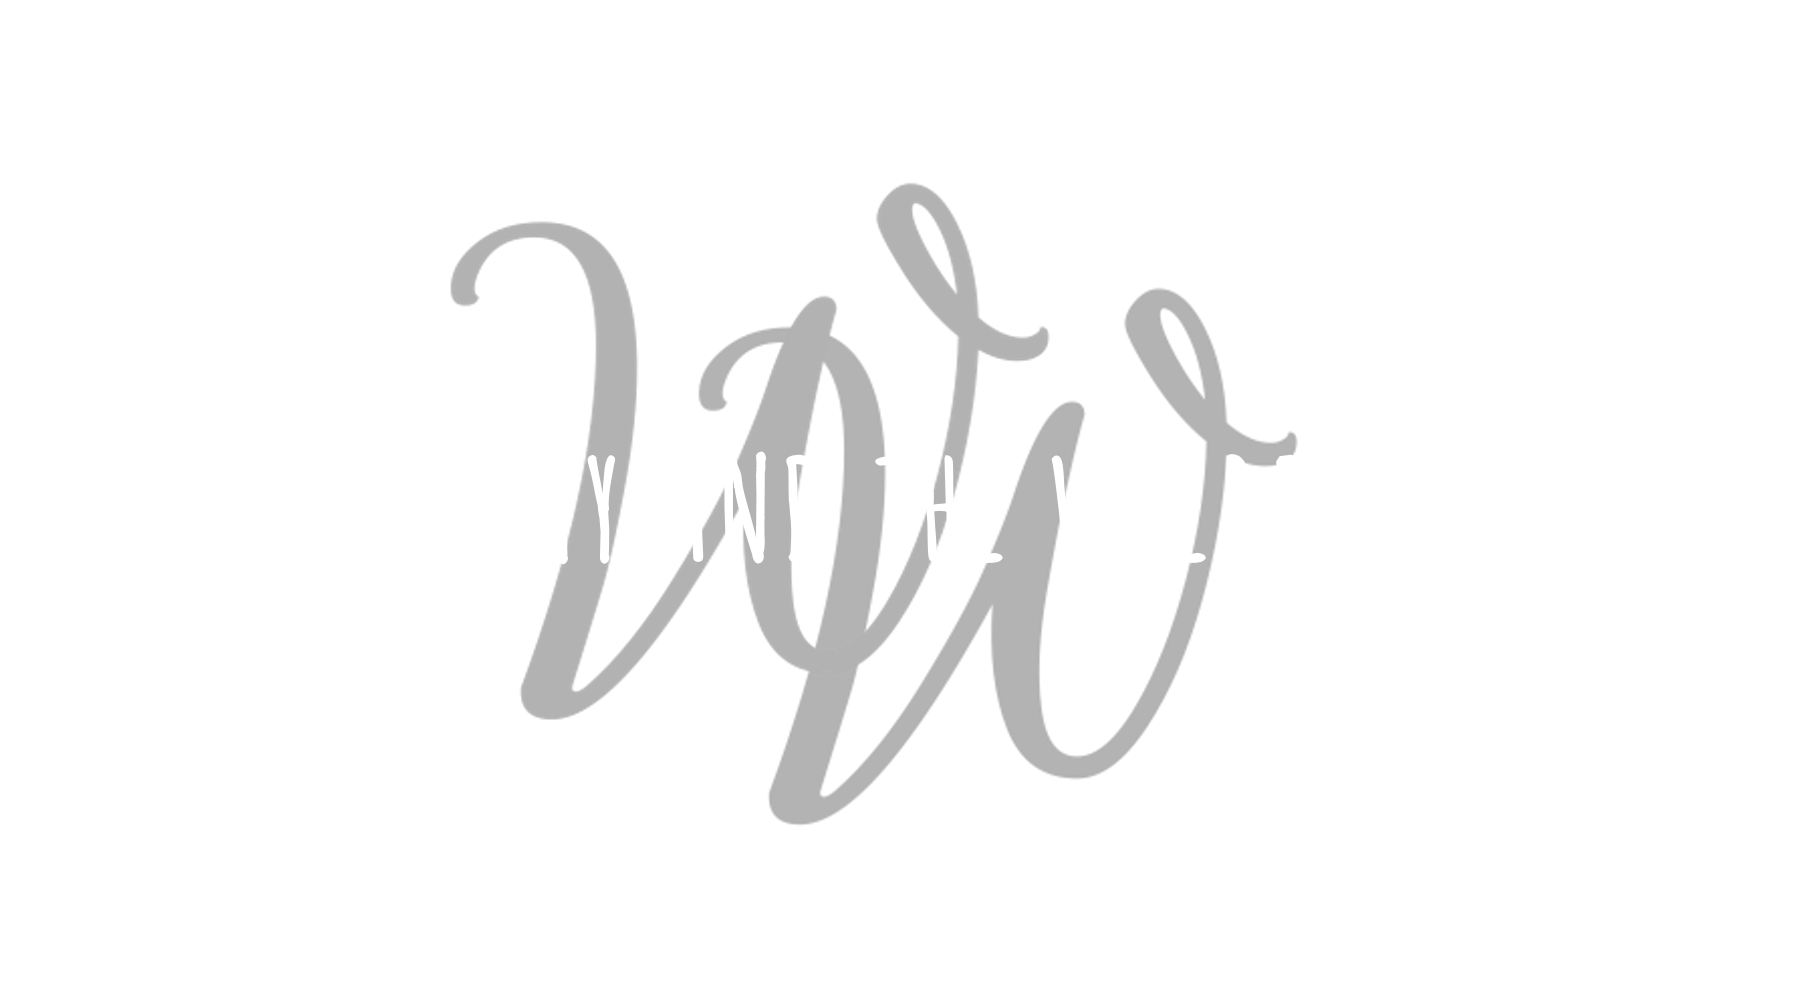 
				
				
				
				
				
				
				
				
				
				
				
				
				
								The Why and The Wherefore 		
		
		
		
		
		
		
		
		
		
		
		
		
		
		